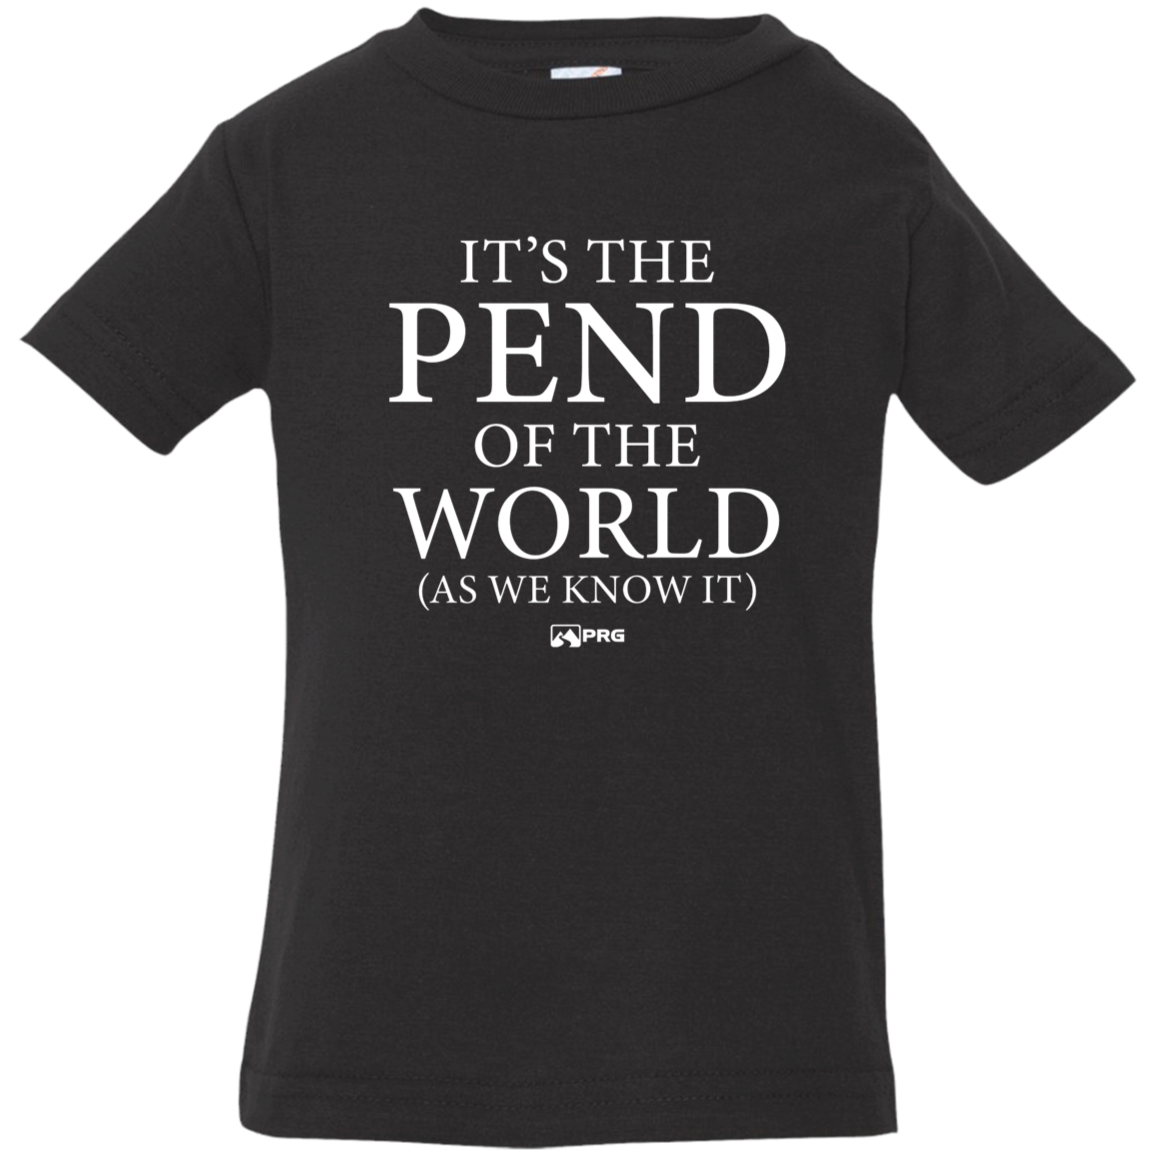 Pend of the World - Infant Shirt